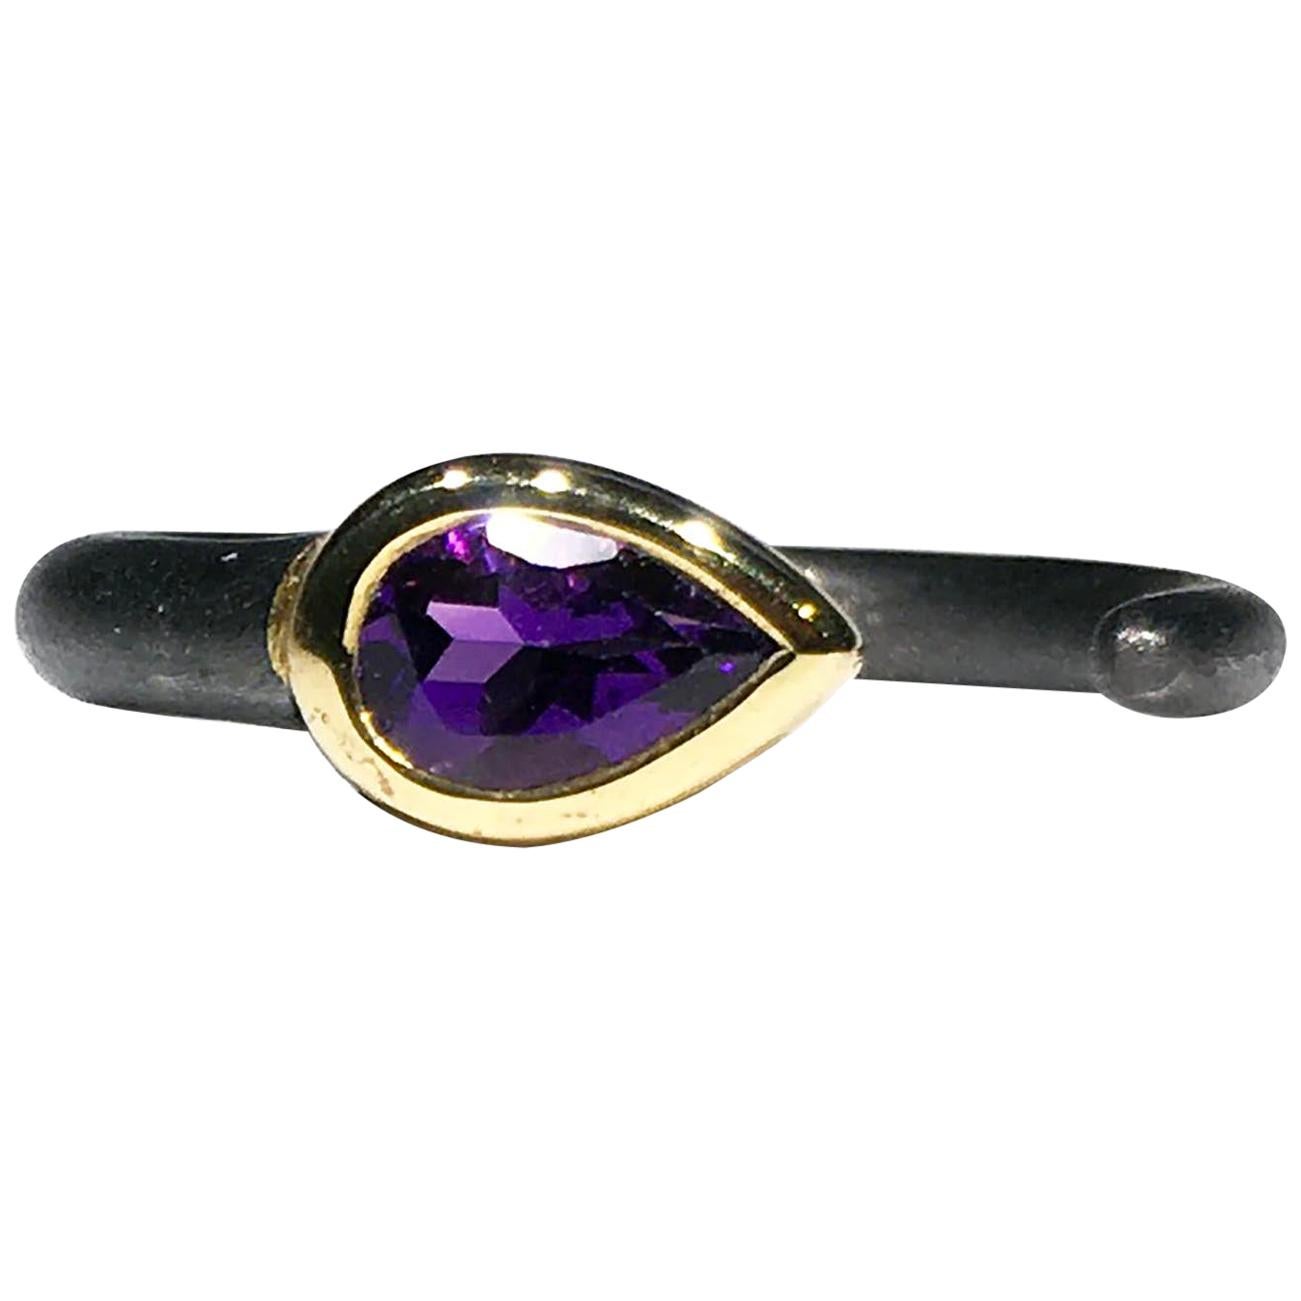 A Blackened Brushed Silver Ring with a Gold Plated Setting featuring a Pear Shaped Amethyst of 0.44 Carats. The 6.5 Gram Silver Band is a Size 7 USA and can easily be changed. 

Originally from San Diego, California, Kary Adam lived in the “Gem